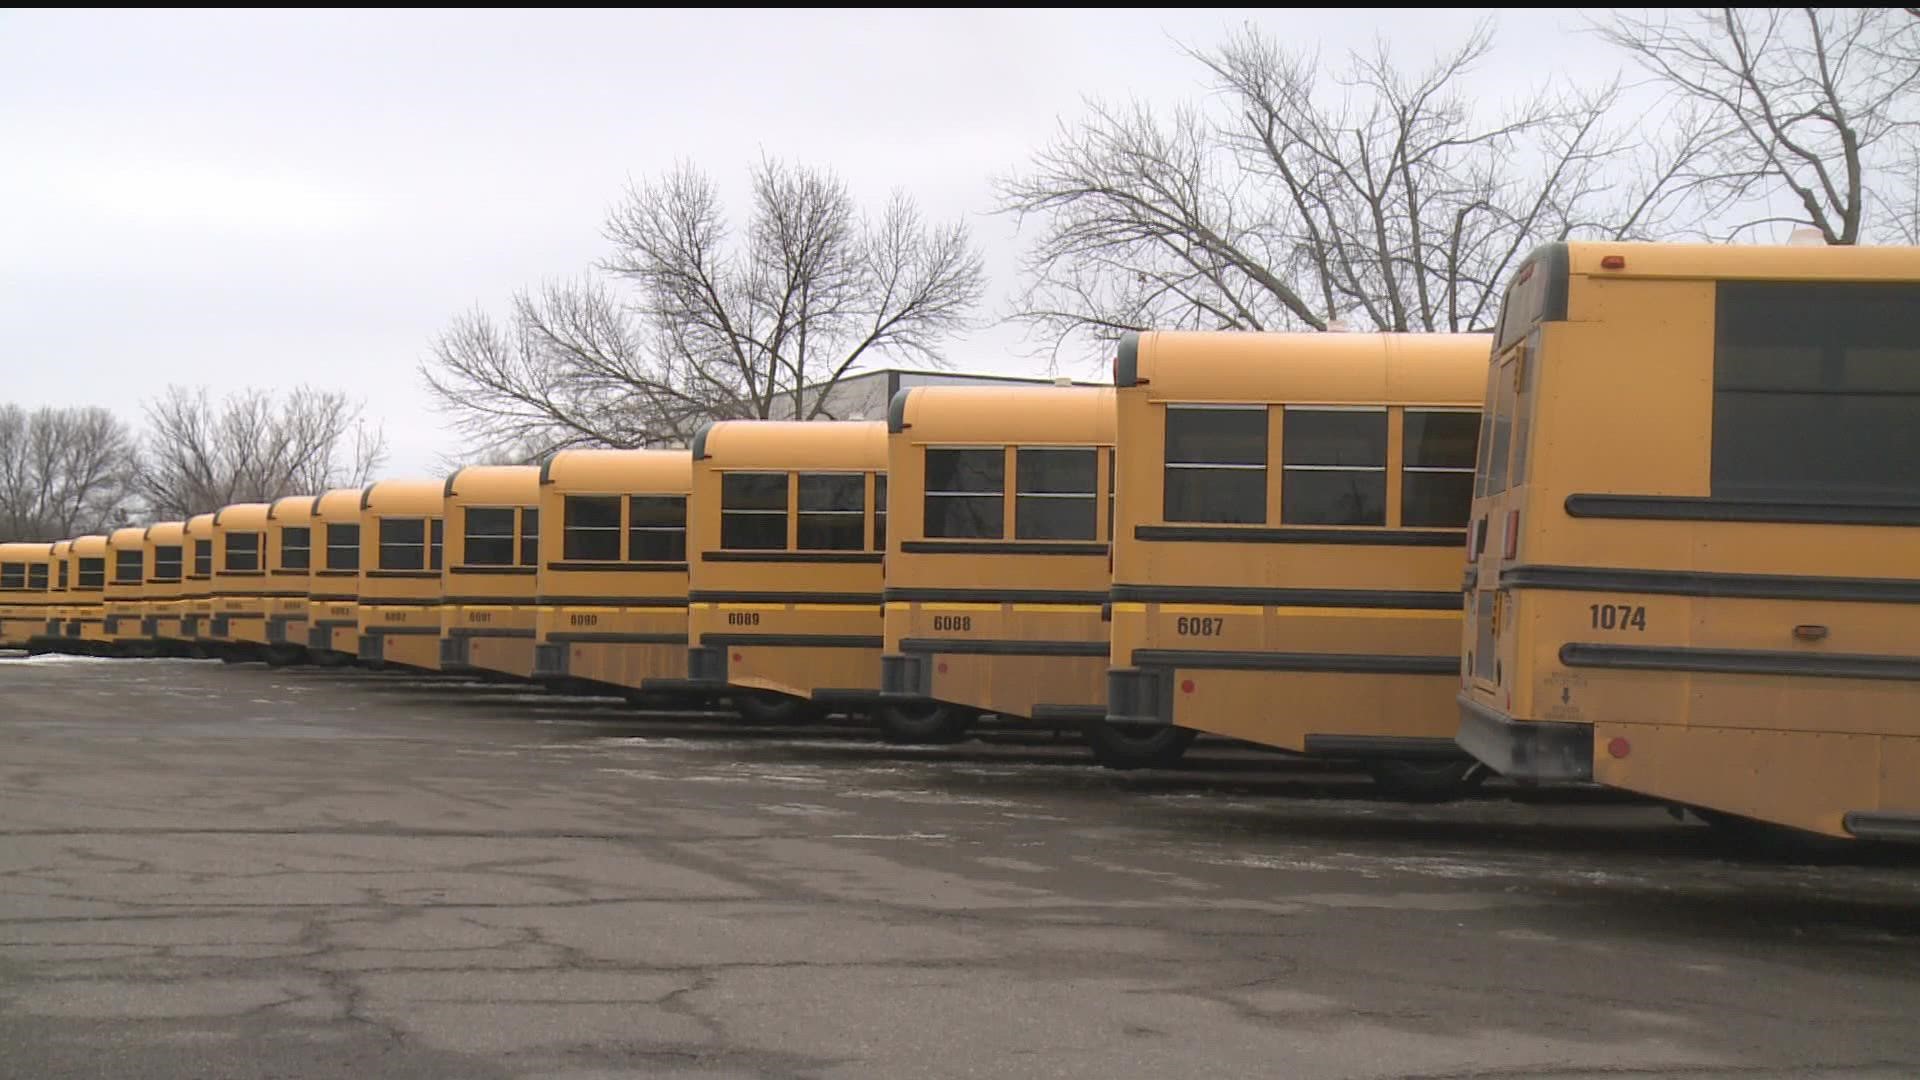 While you probably heard about the bus driver shortage at the beginning of the school year, school districts also see a dip around the holidays.